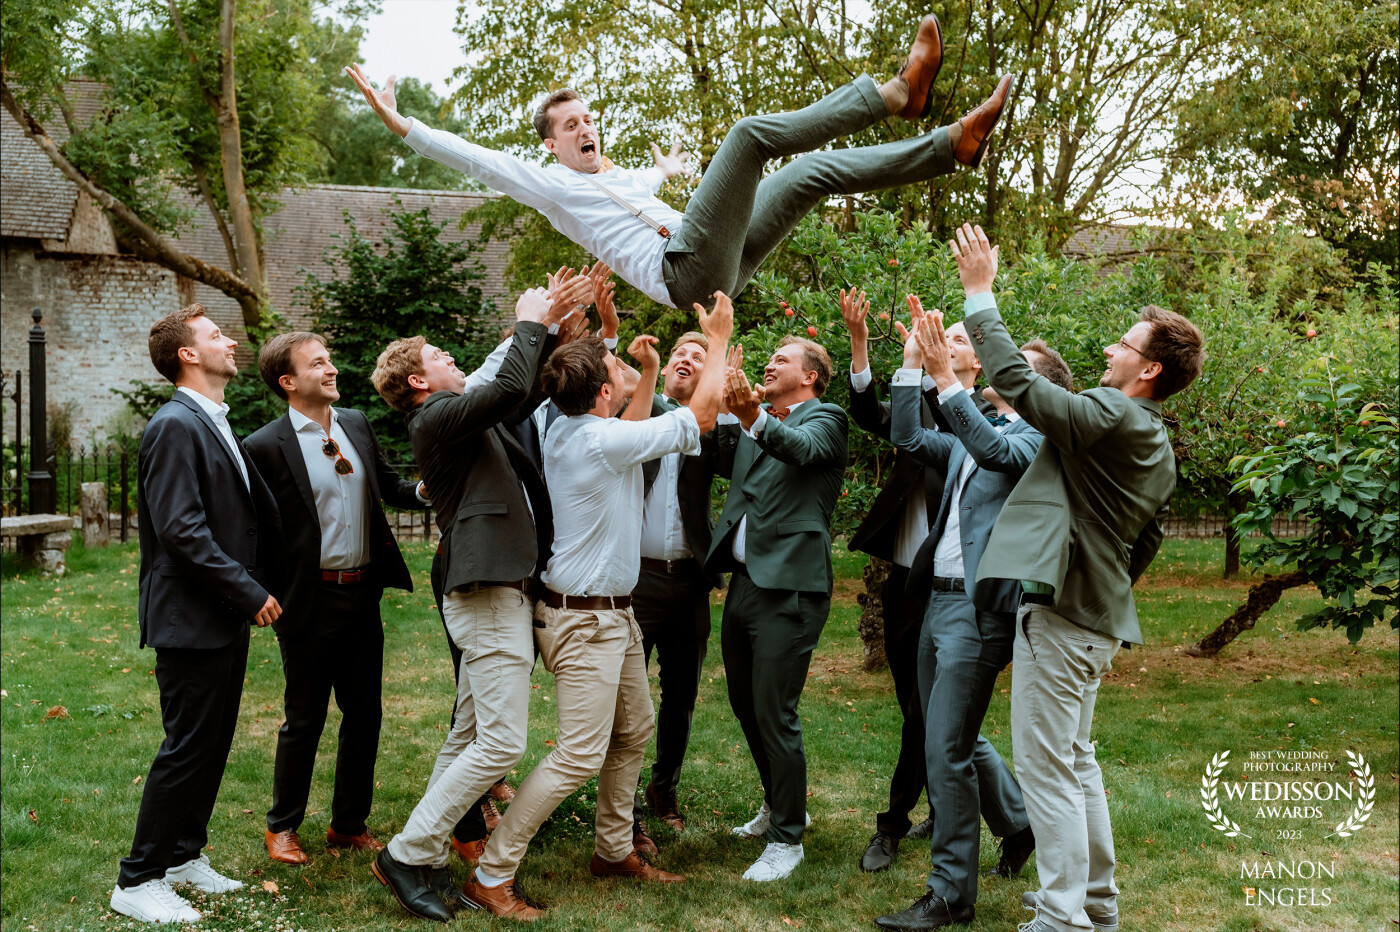 The groomsmen wanted a fun photo with the groom. So I told them it would be fun if they threw him in the air. I clicked at the exact right time. So happy with the result!